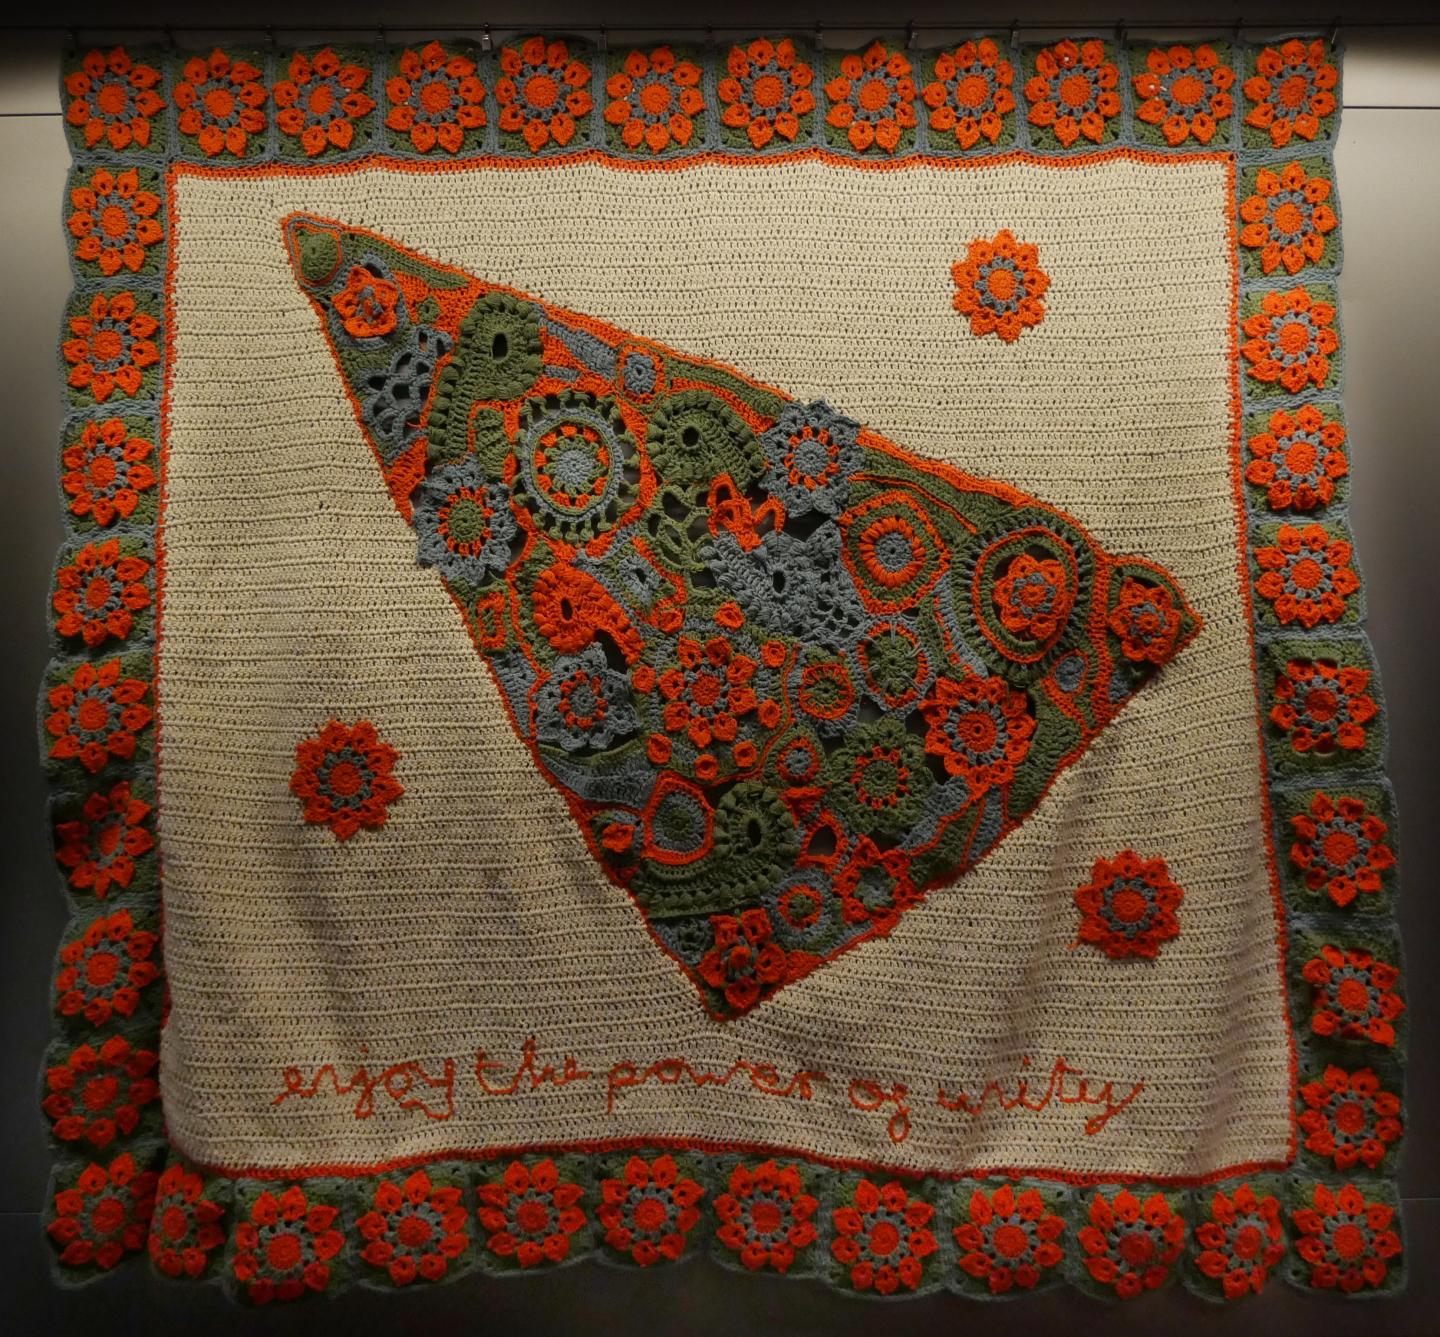 An orange, green and blue kanga with a colourful border and central triangle with the words 'enjoy the power of unity' at the bottom